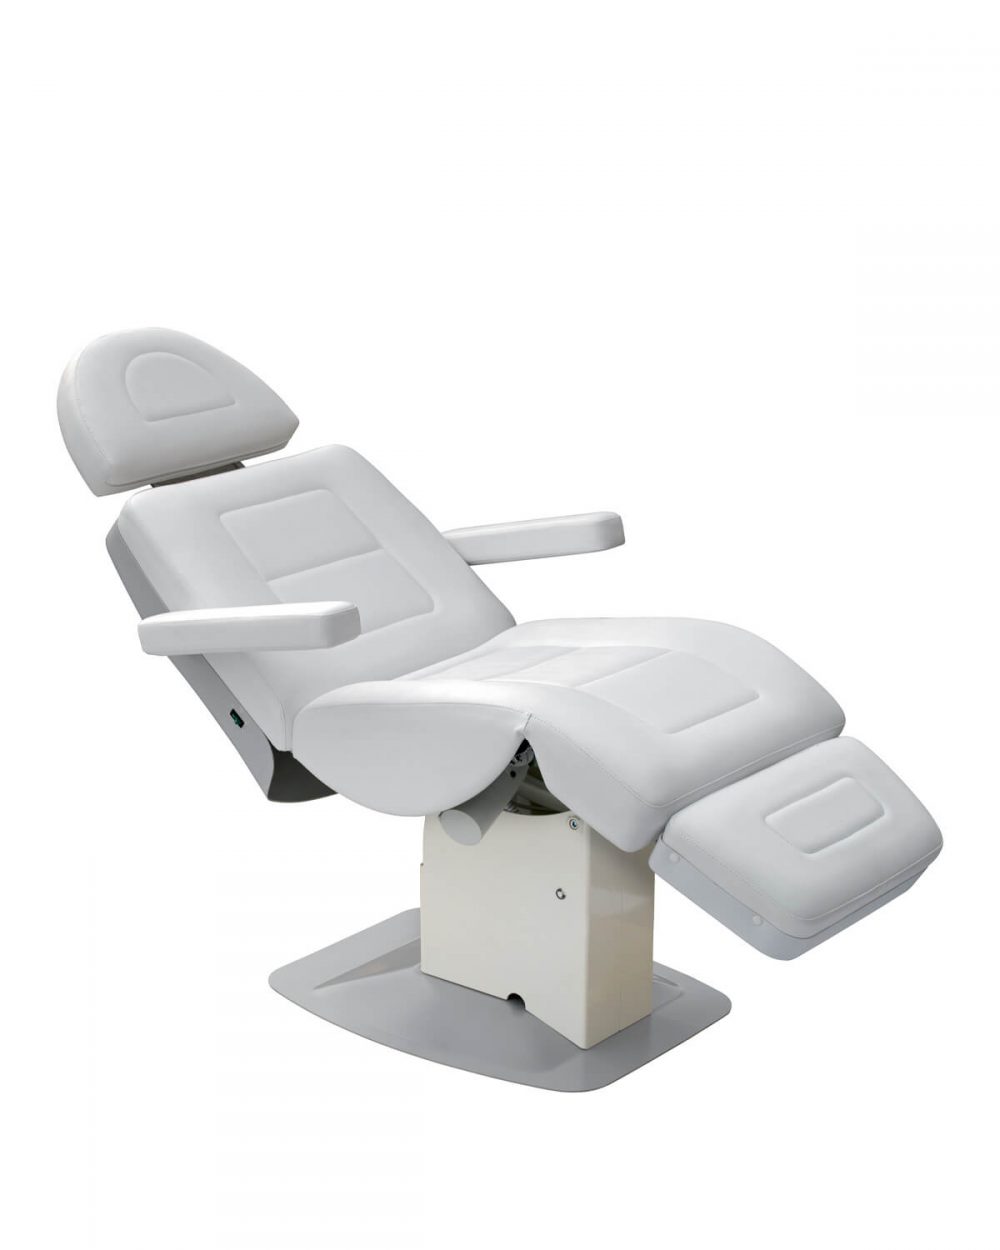 Multi-function chair Target Beauty